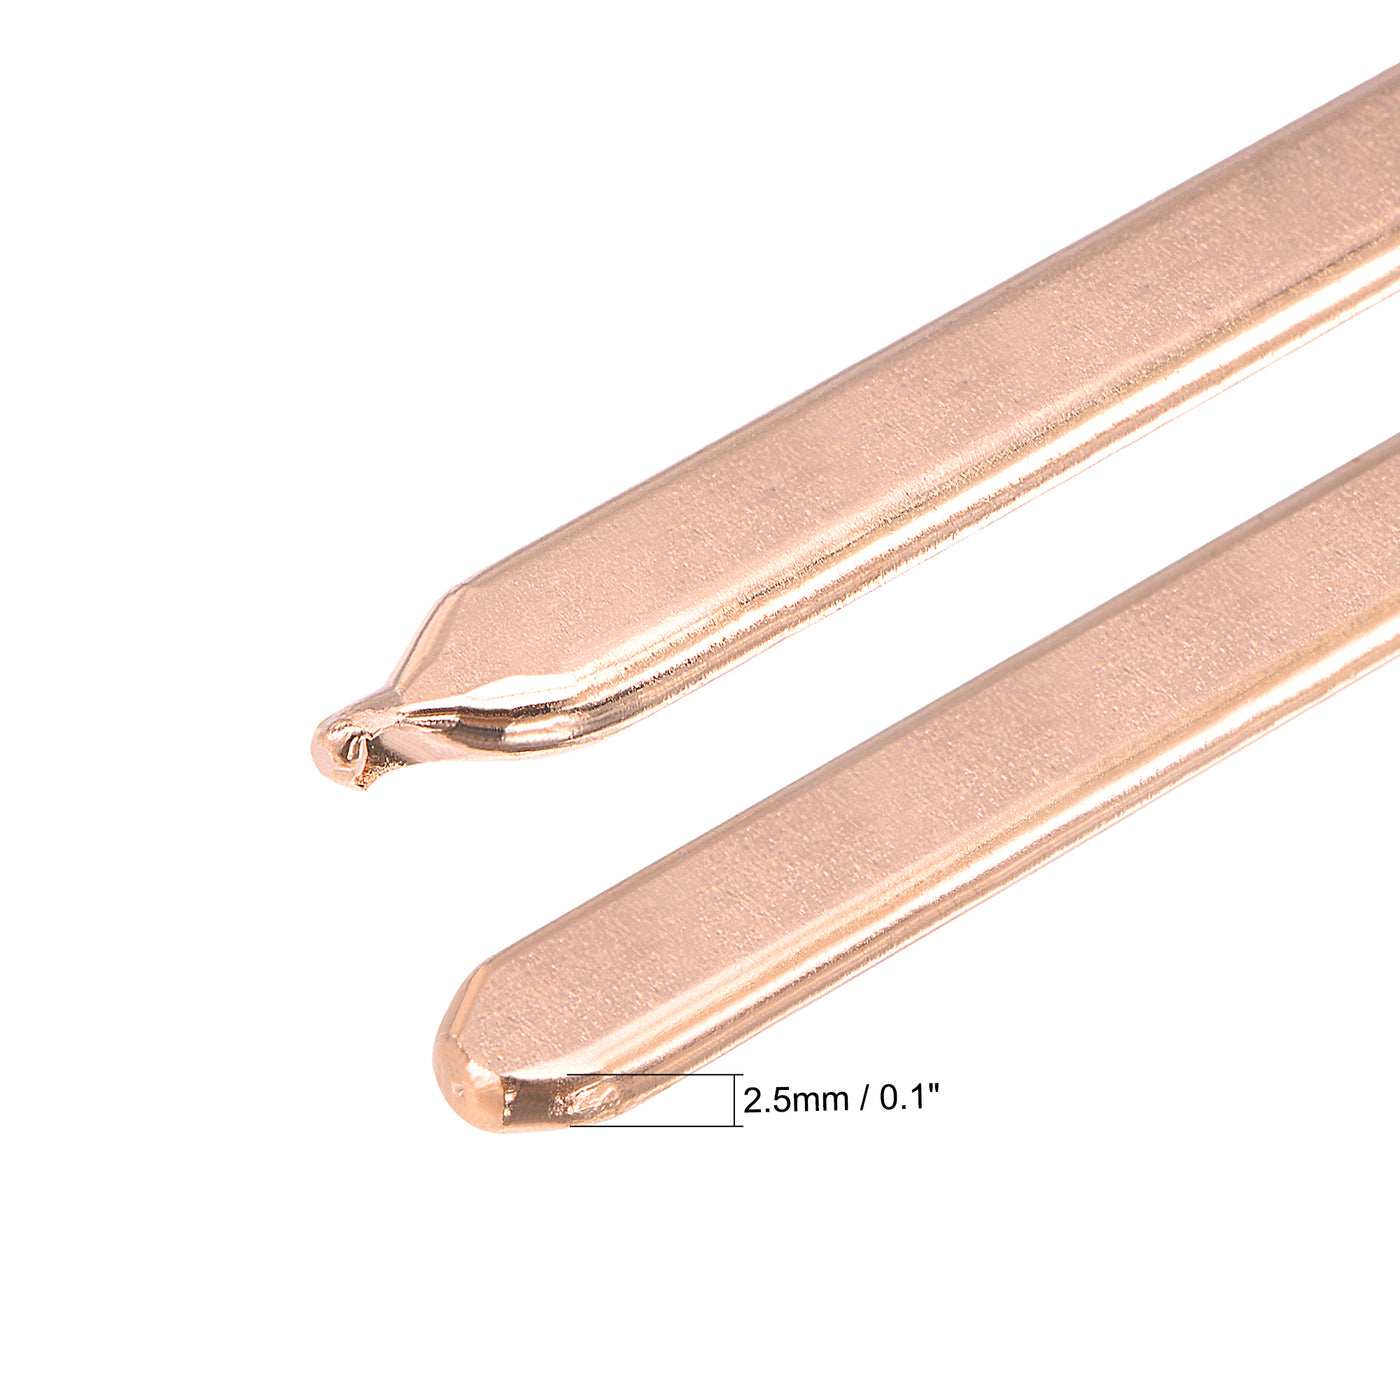 uxcell Uxcell Copper Flat Heat Pipe for Cooling Laptop CPU GPU Heatsink 250mm x 8mm x 3mm